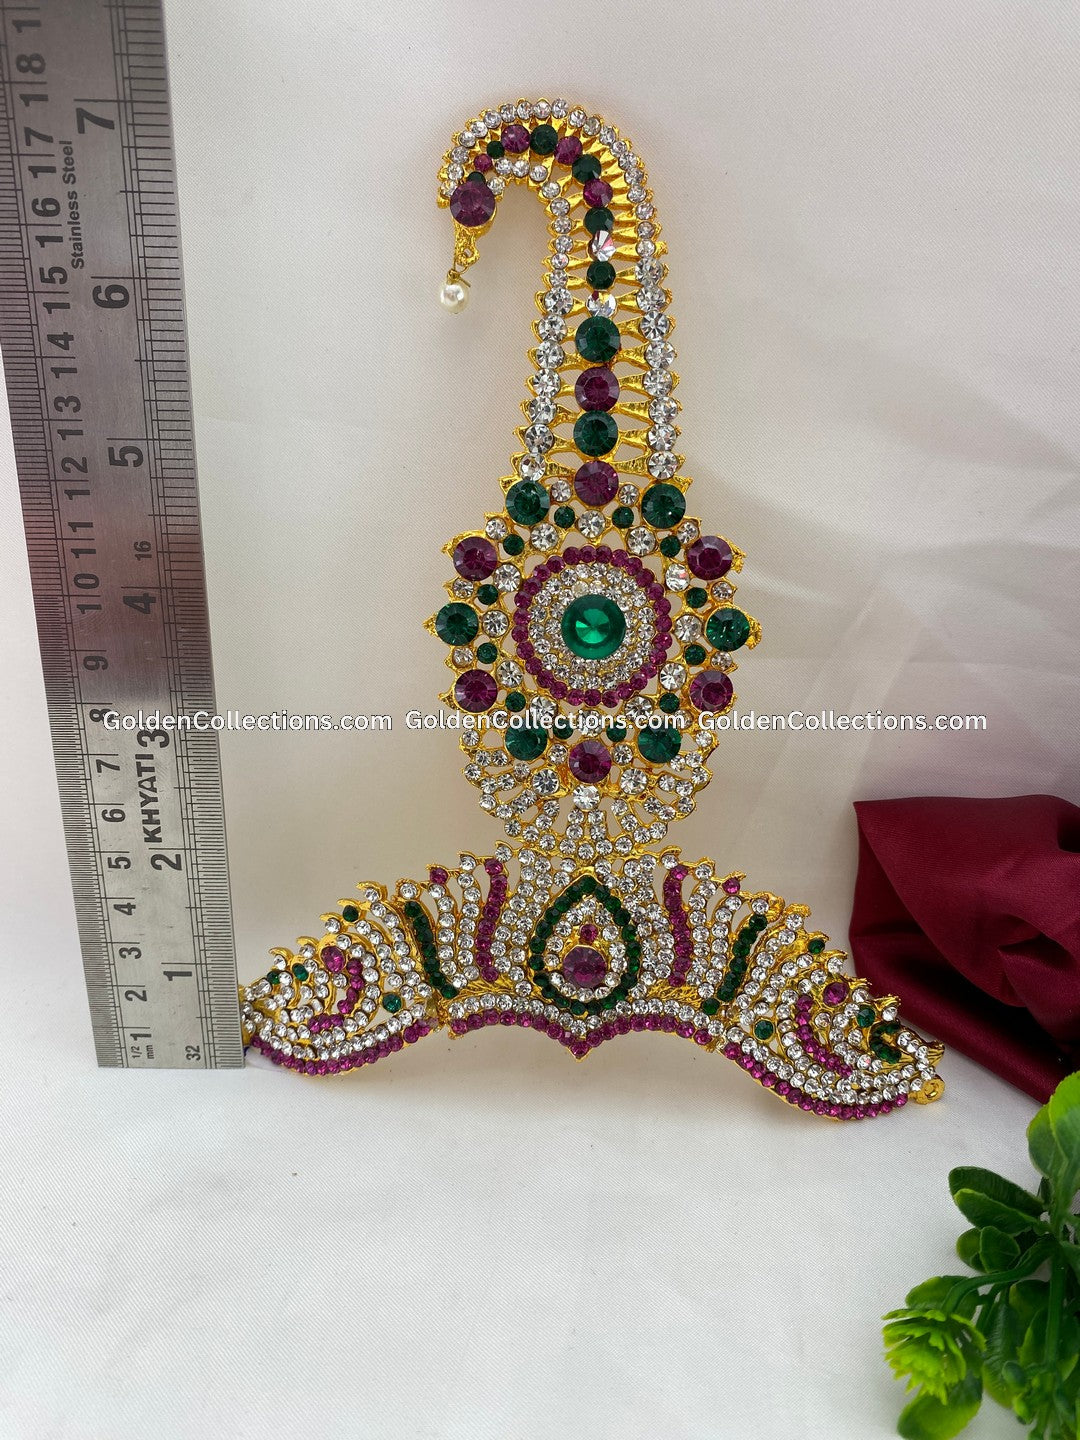 Royal Crown for Hindu Deity - GoldenCollections DGC-055 2